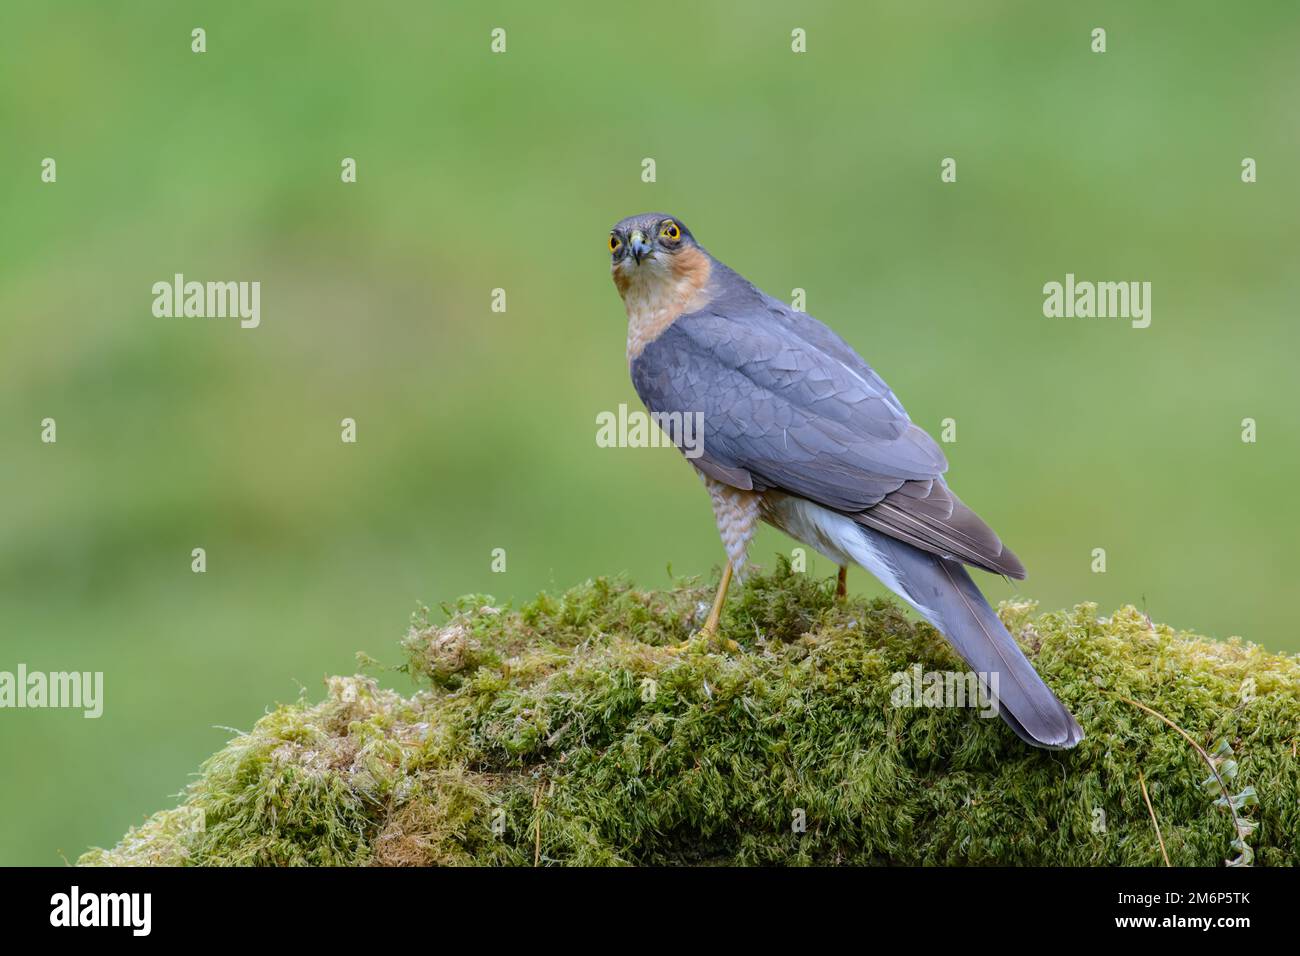 Sparrow hawk, Accipiter Nisus, perched on a lichen covered log, view from behind, head turned back, Blurred green background Stock Photo